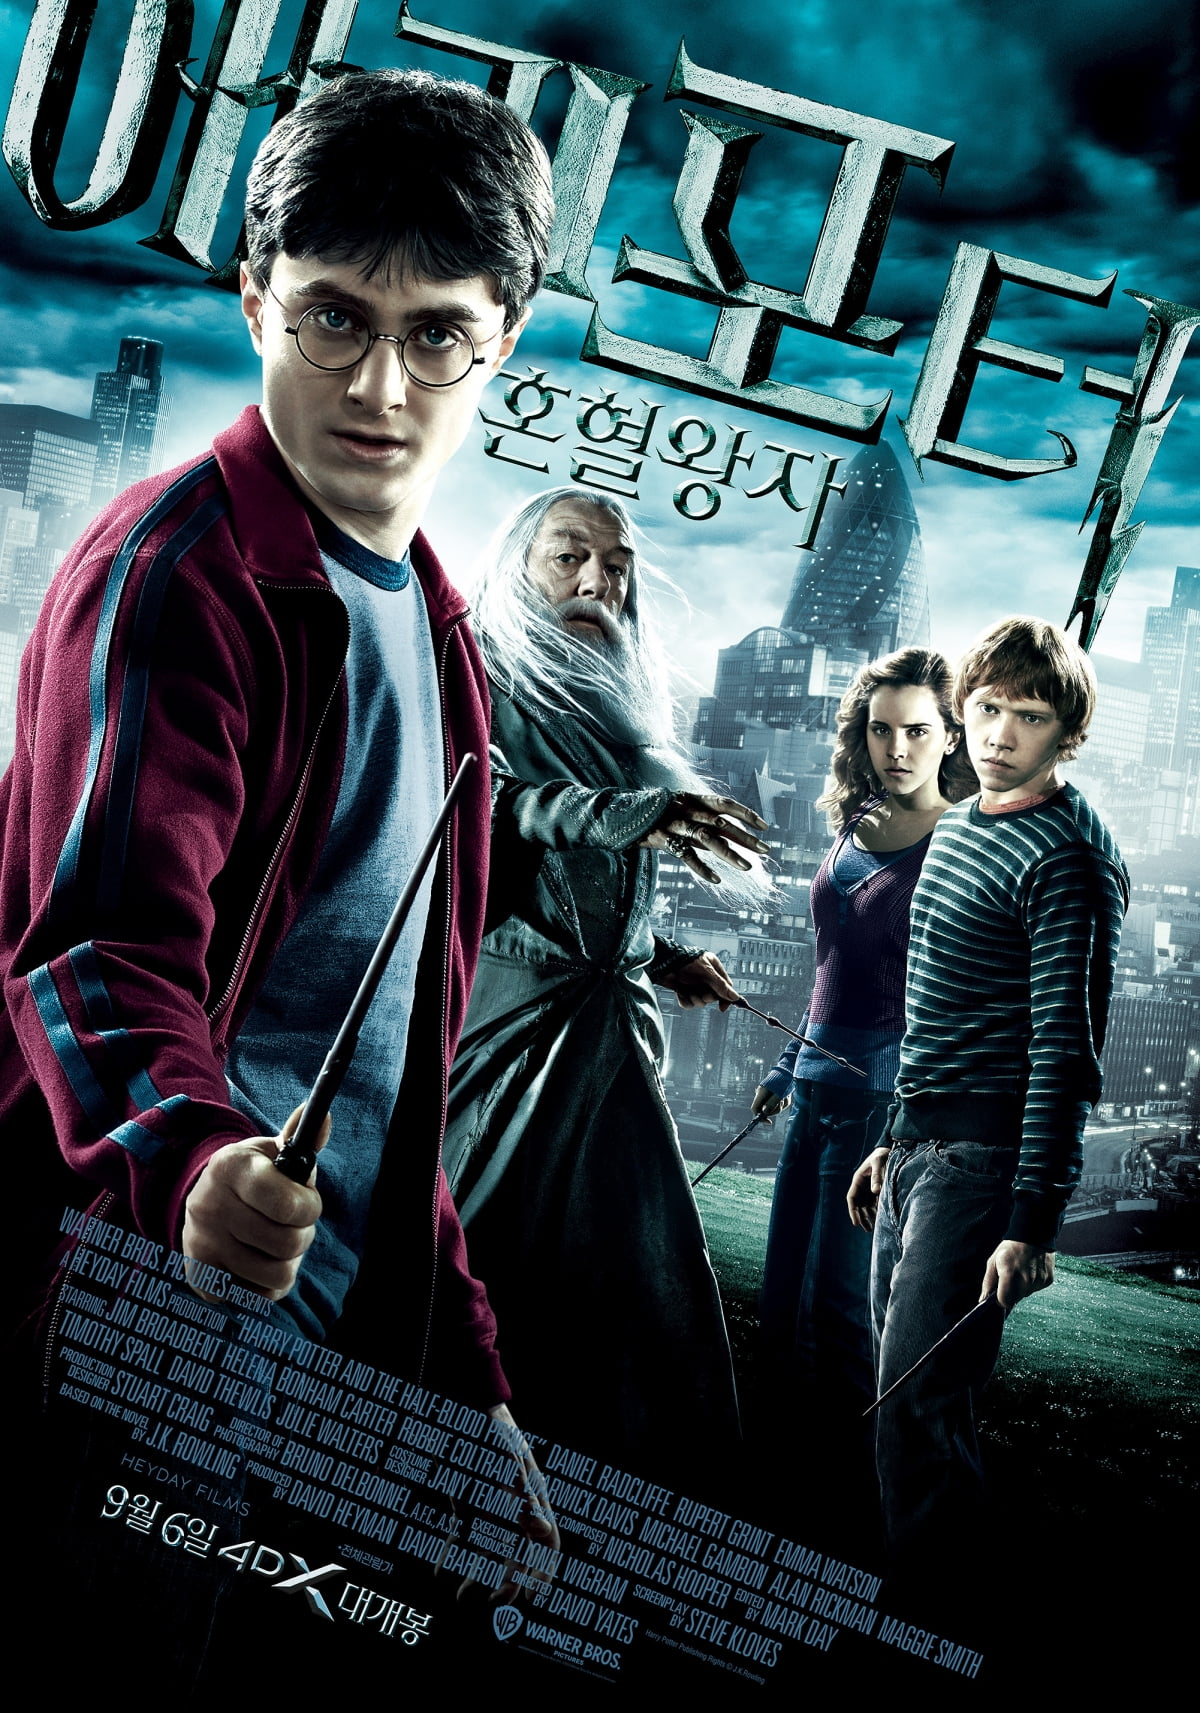 Warner Bros. 100th anniversary special exhibition, 'Harry Potter and the Half-Blood Prince' will meet in 4DX from September 6